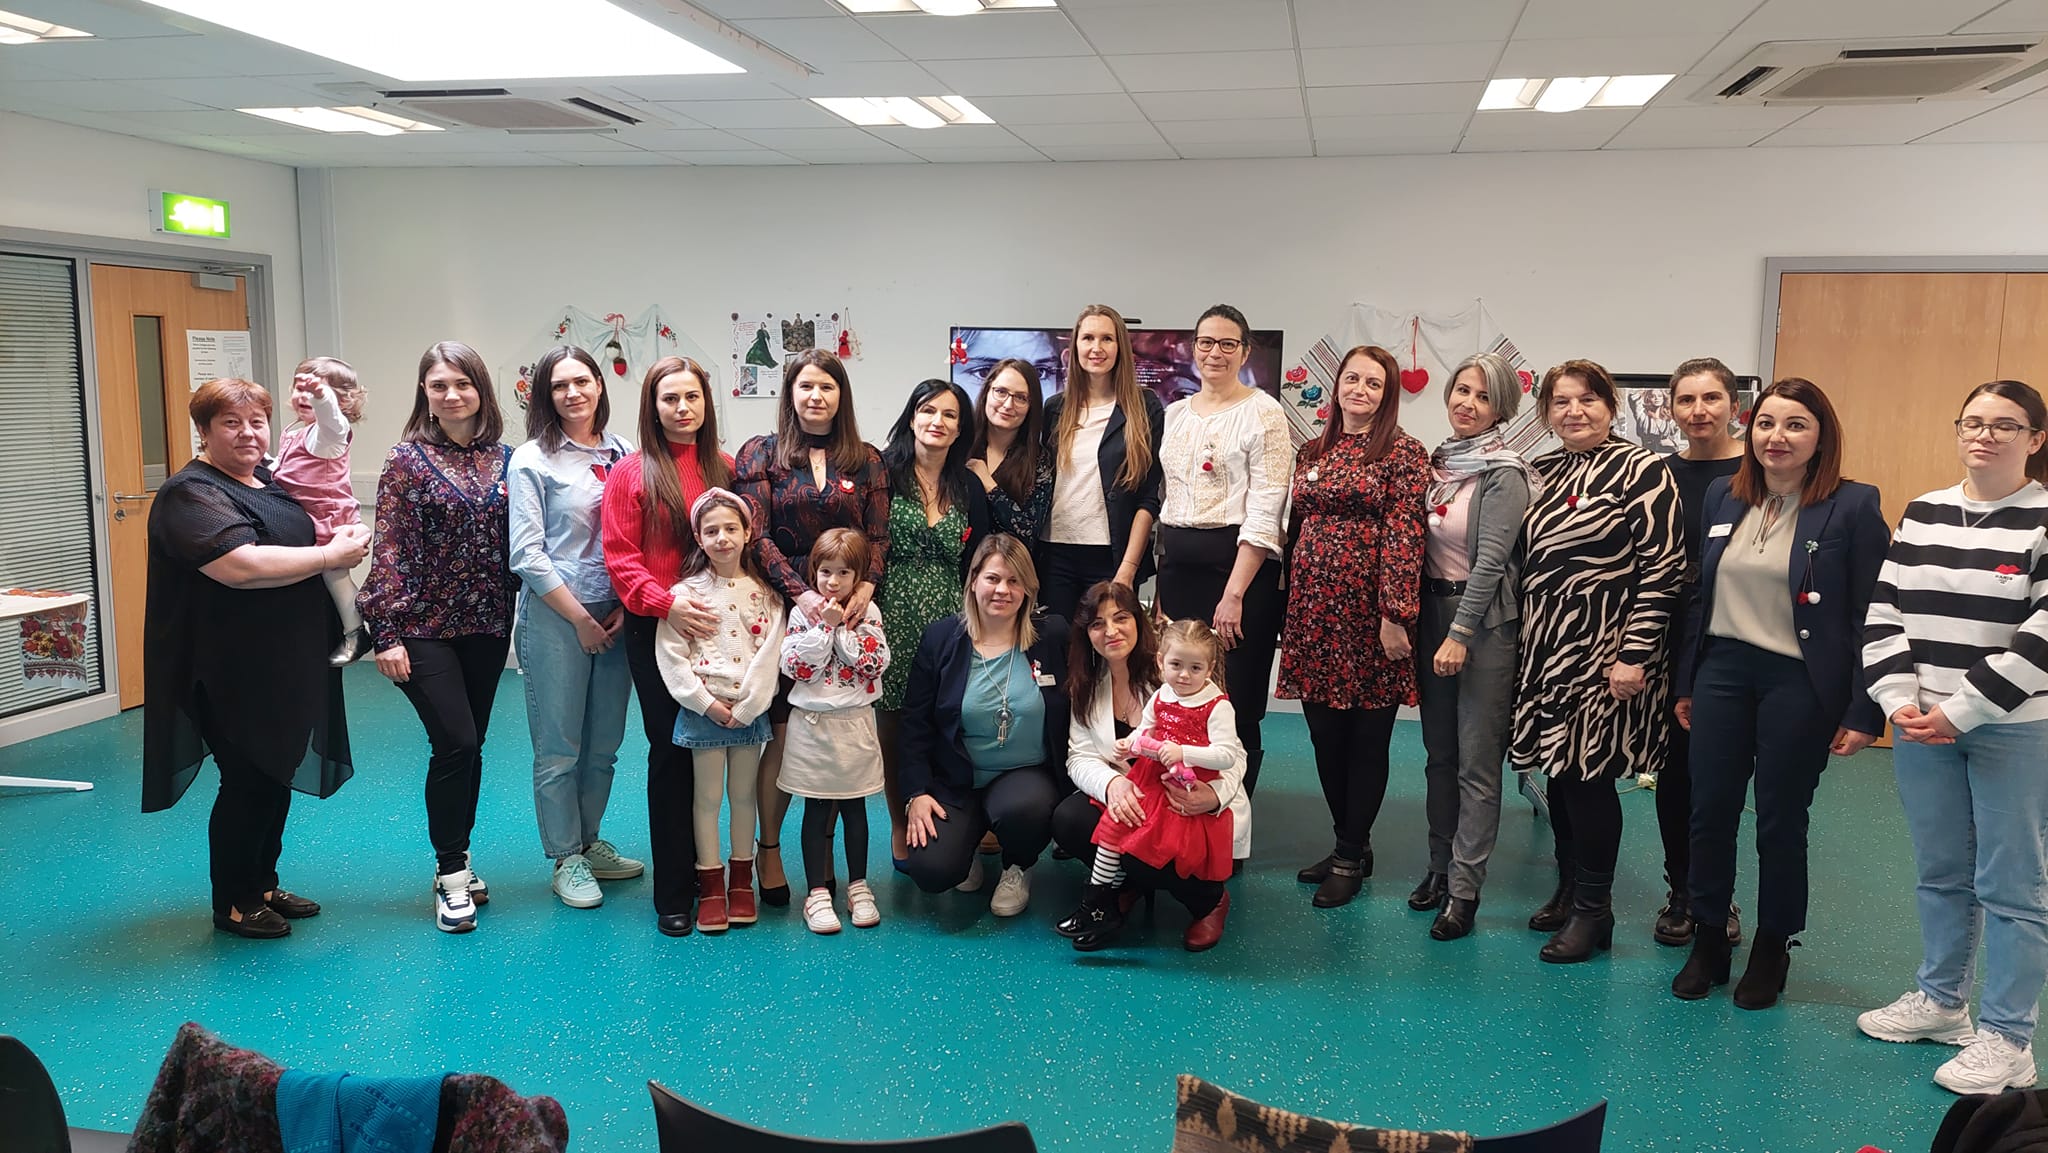 Celebration dedicated to the International Women's Day, organized in Manchester